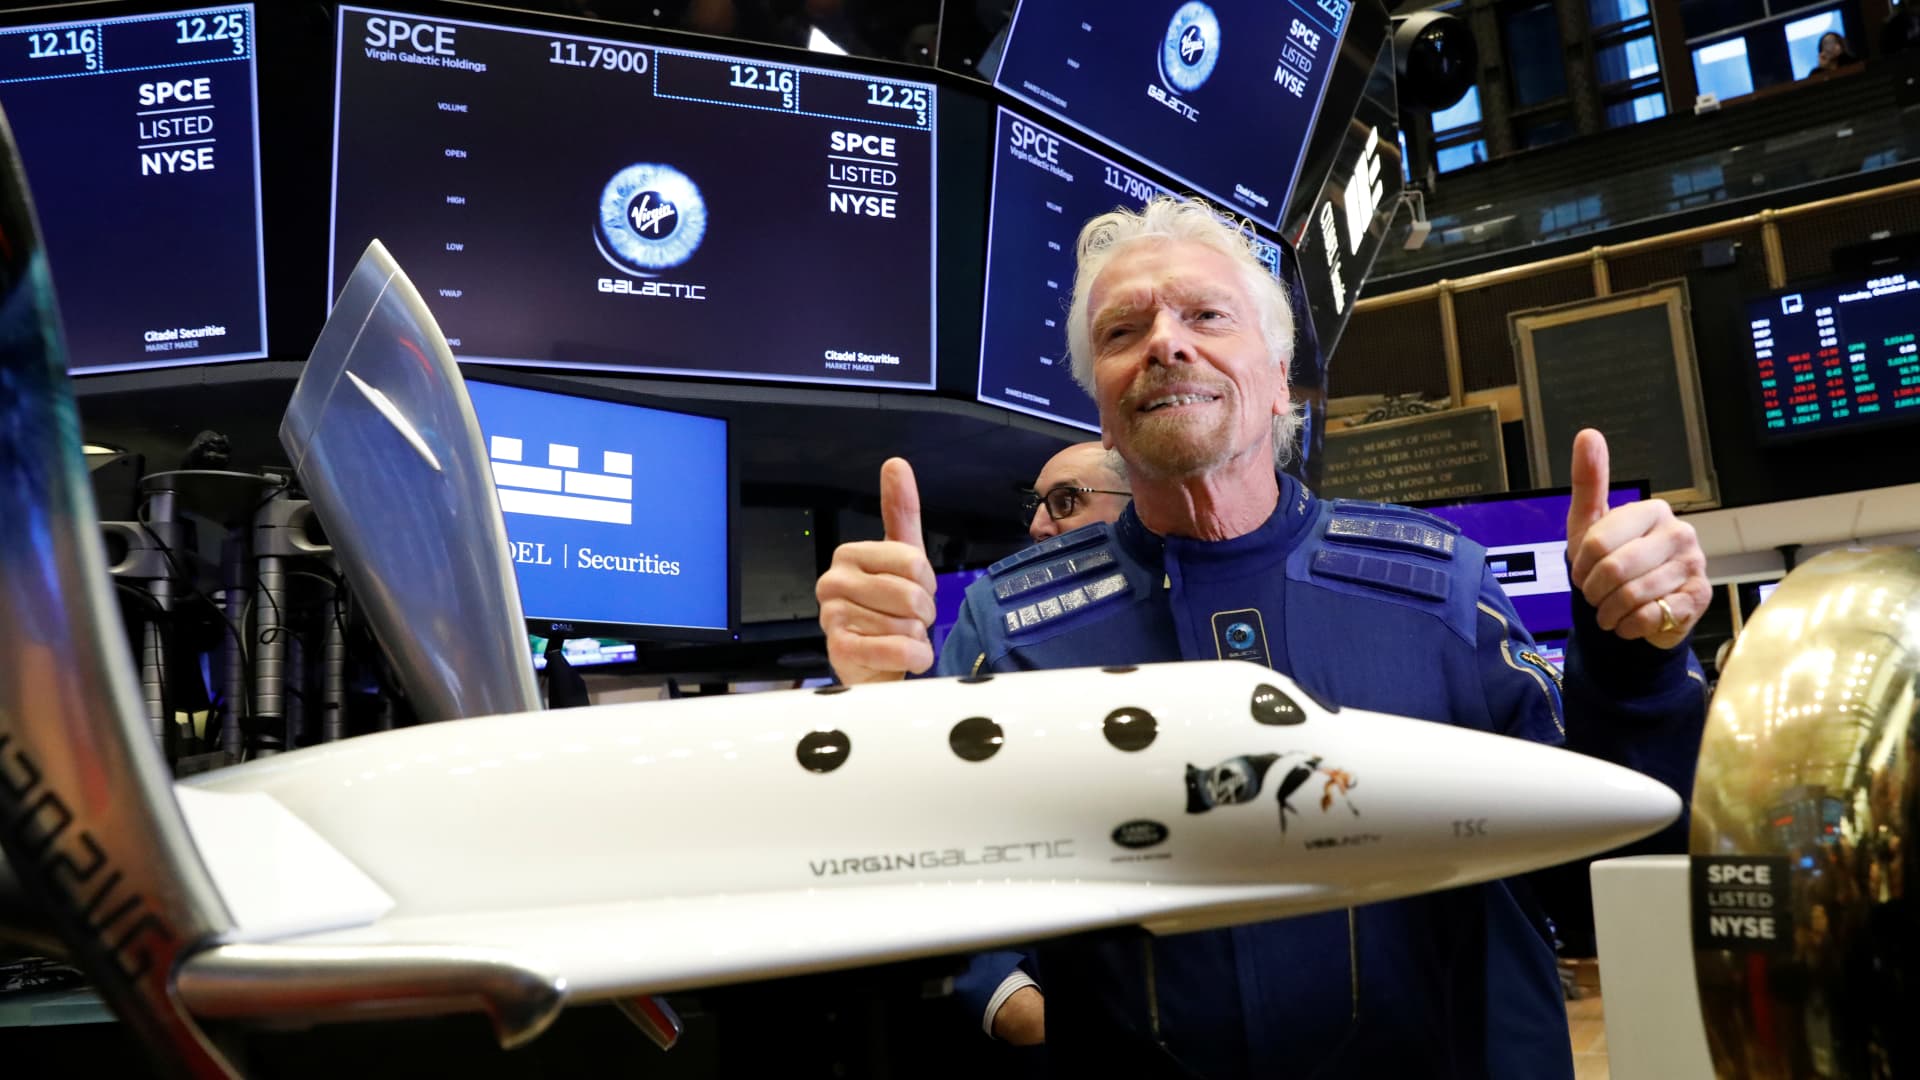 Sir Richard Branson stands on the floor of the New York Stock Exchange (NYSE) ahead of Virgin Galactic (SPCE) trading in New York, U.S., October 28, 2019.